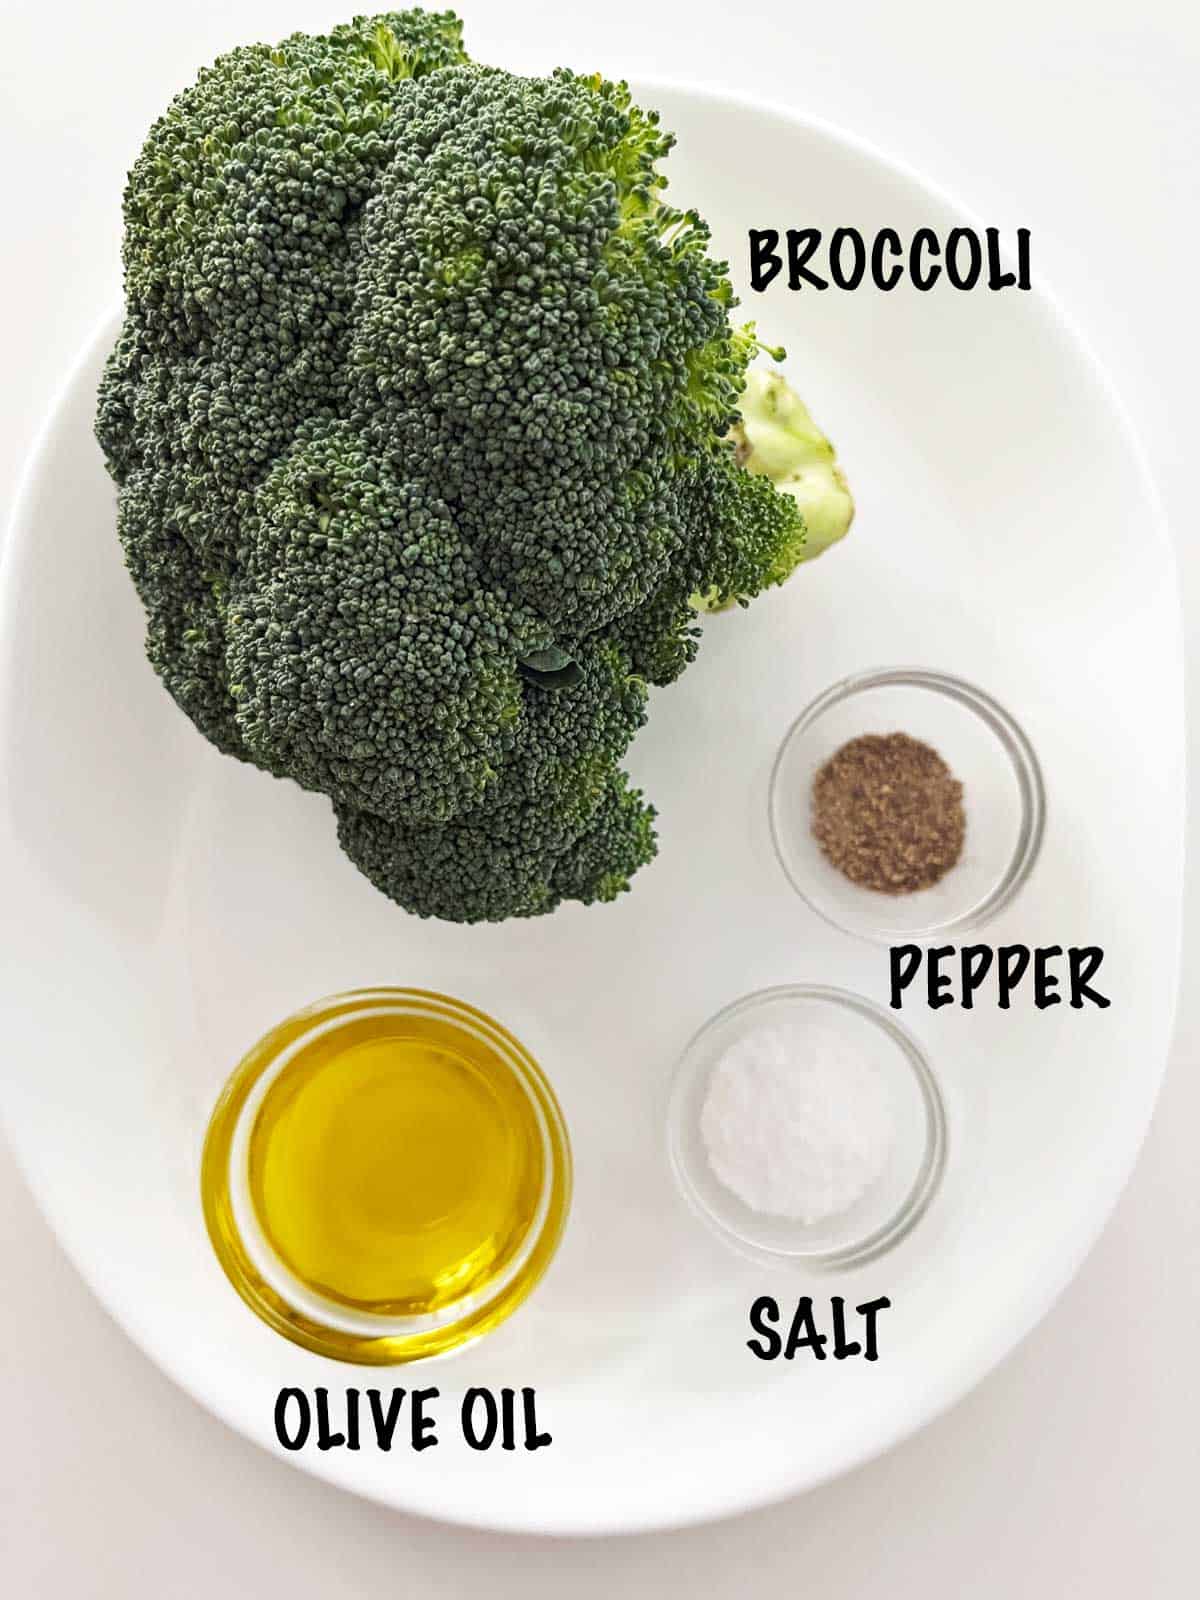 The ingredients needed for roasting broccoli. 